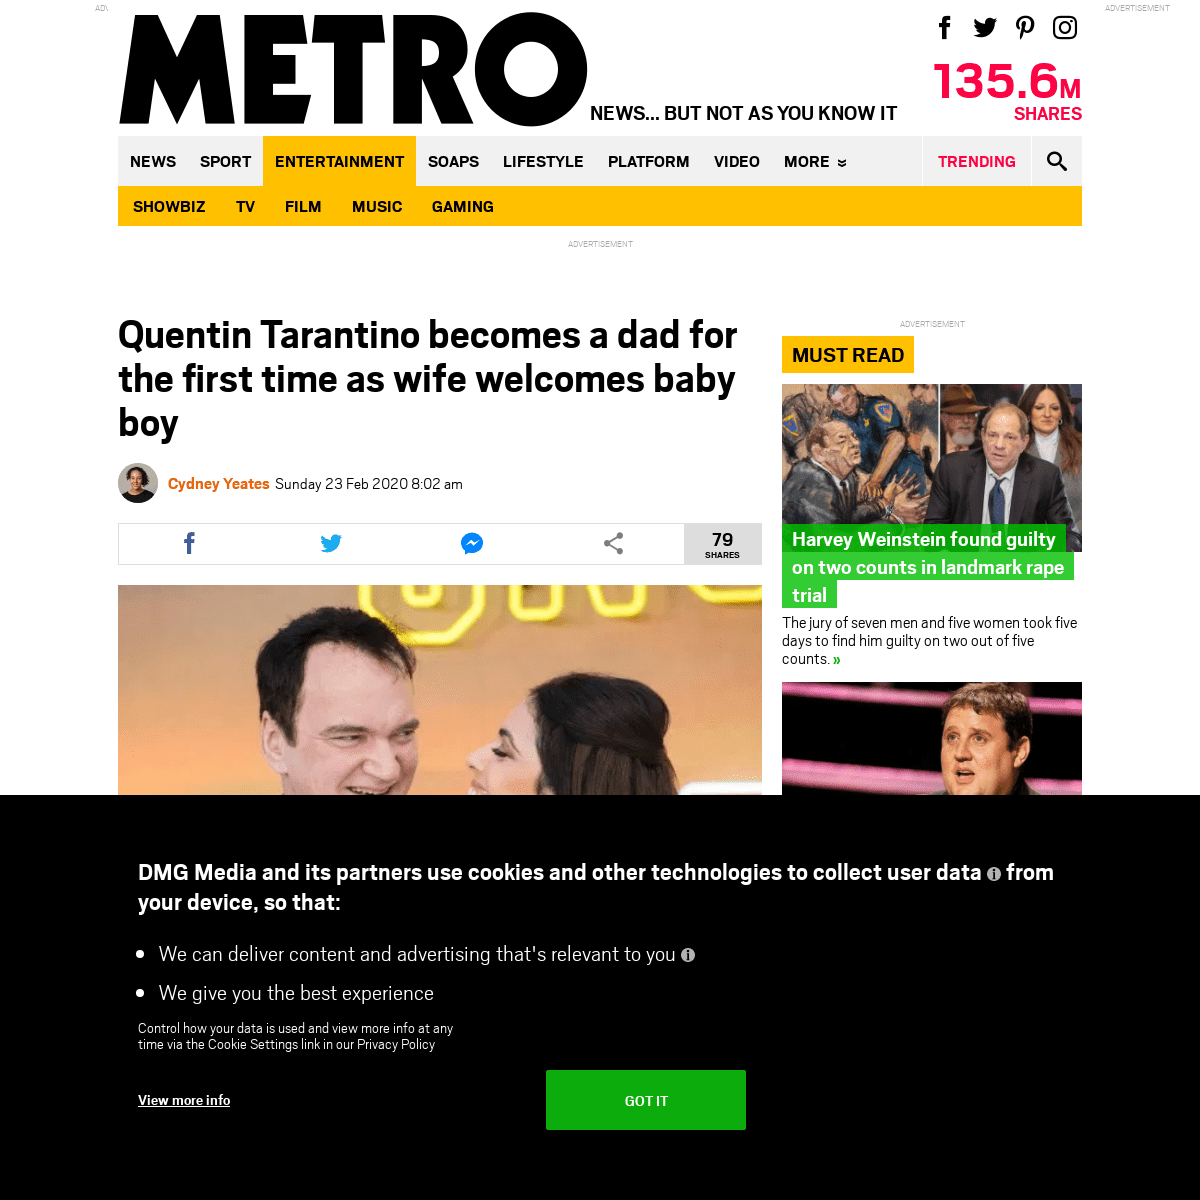 A complete backup of metro.co.uk/2020/02/23/quentin-tarantino-becomes-father-first-time-wife-welcomes-baby-boy-12286450/